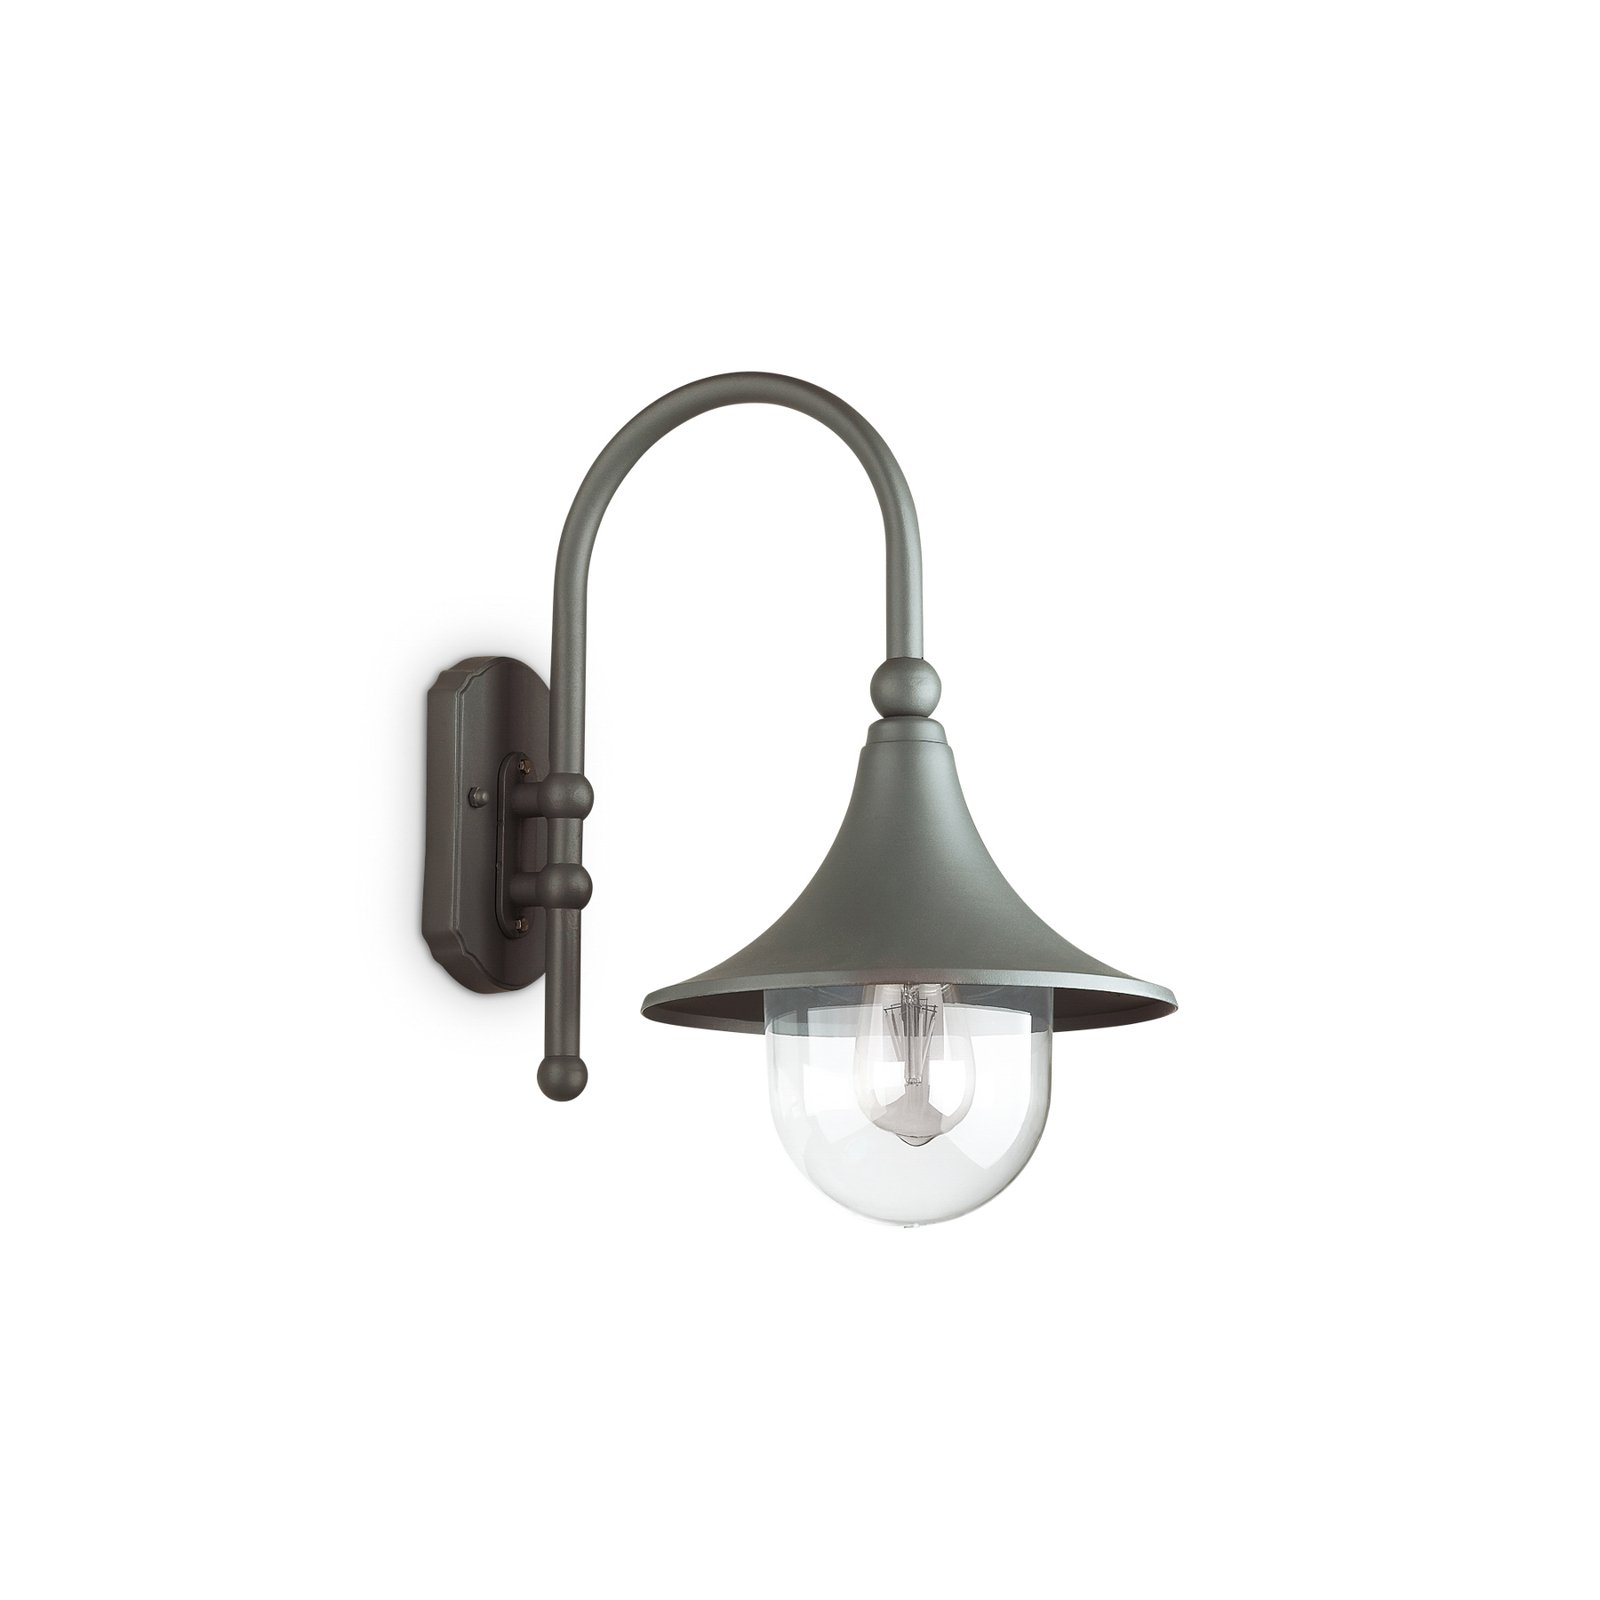 Ideal Lux outdoor wall lamp Cima, anthracite, metal, height 46 cm